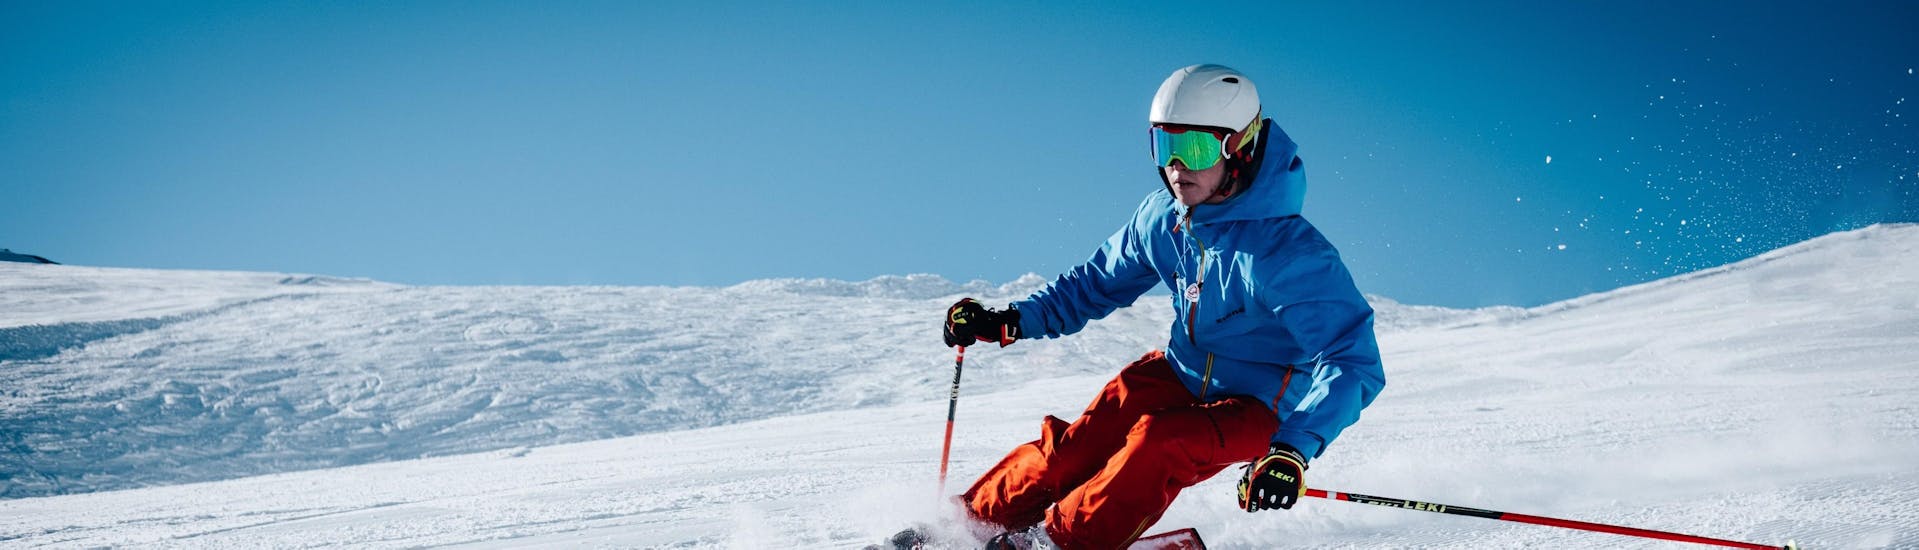 A skier is skiing down a slope with confidence thanks to his Private Ski Lessons for Adults - All Levels with the swiss ski school Charmey.